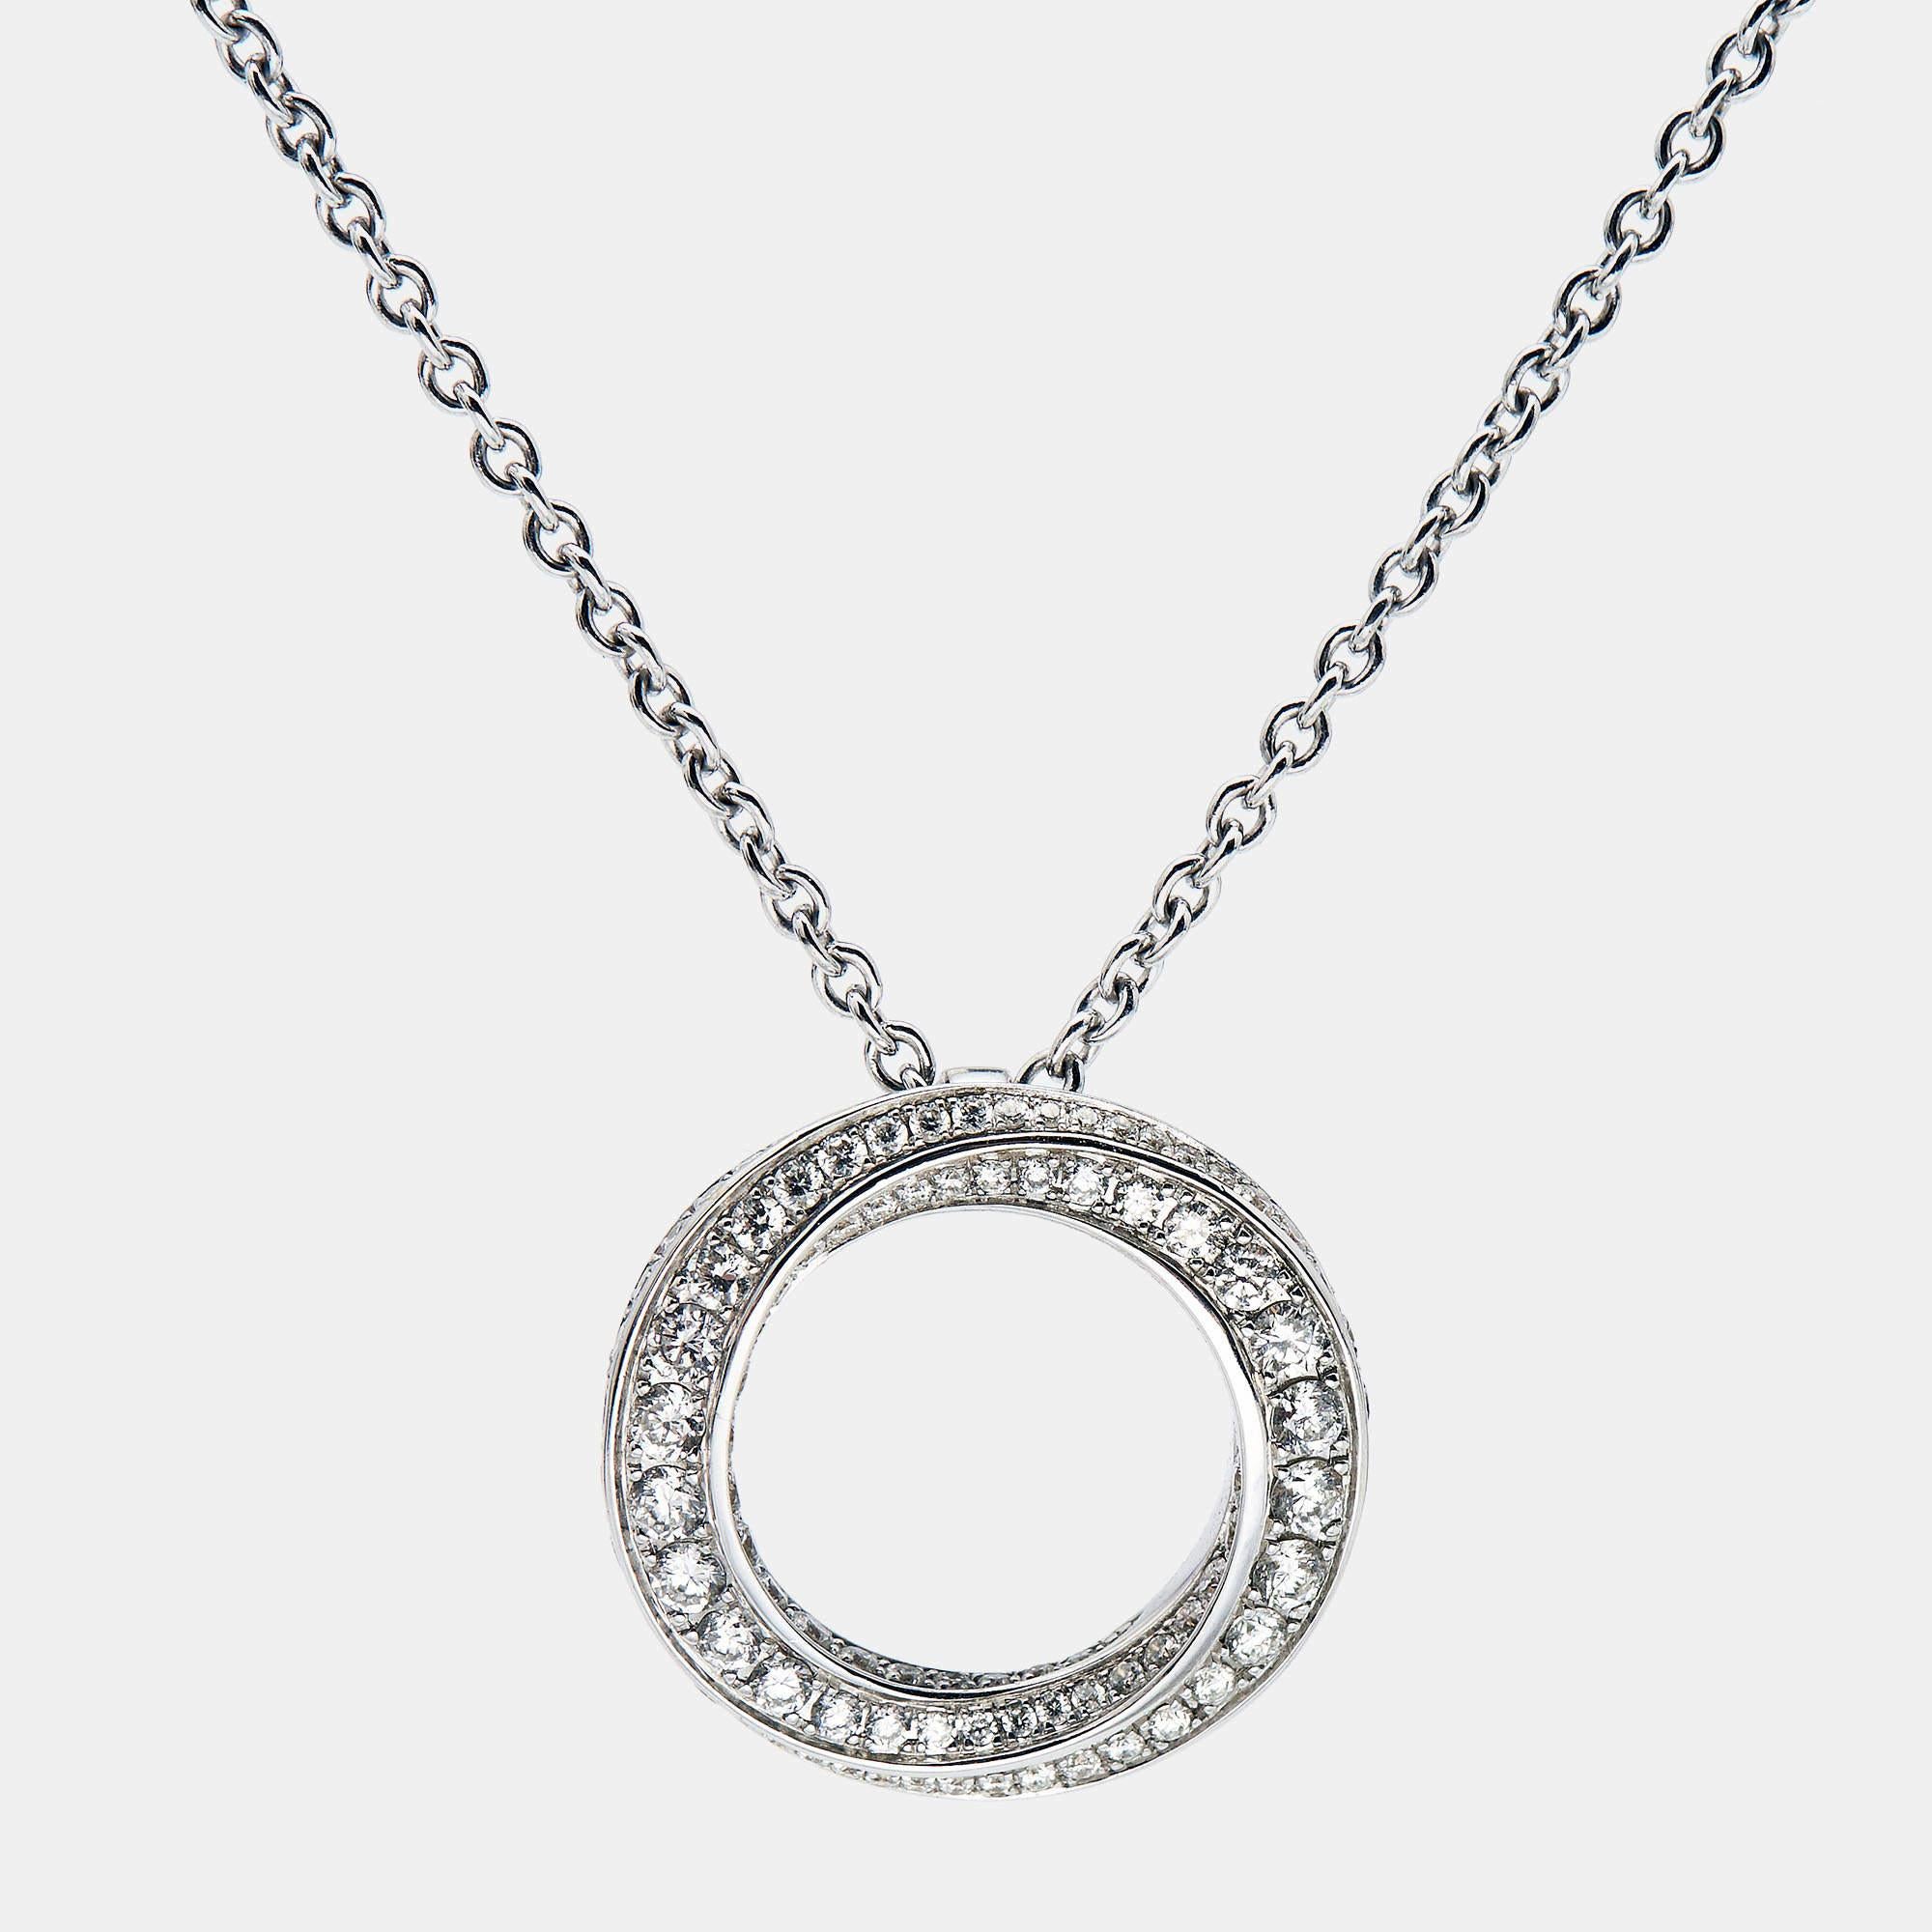 This ethereal necklace from Graff is sure to make for a conversation starter. It spells class, minimalism, and femininity in ample sums and has been crafted to complement your unique personality. It is made from 18K white gold, and the dainty